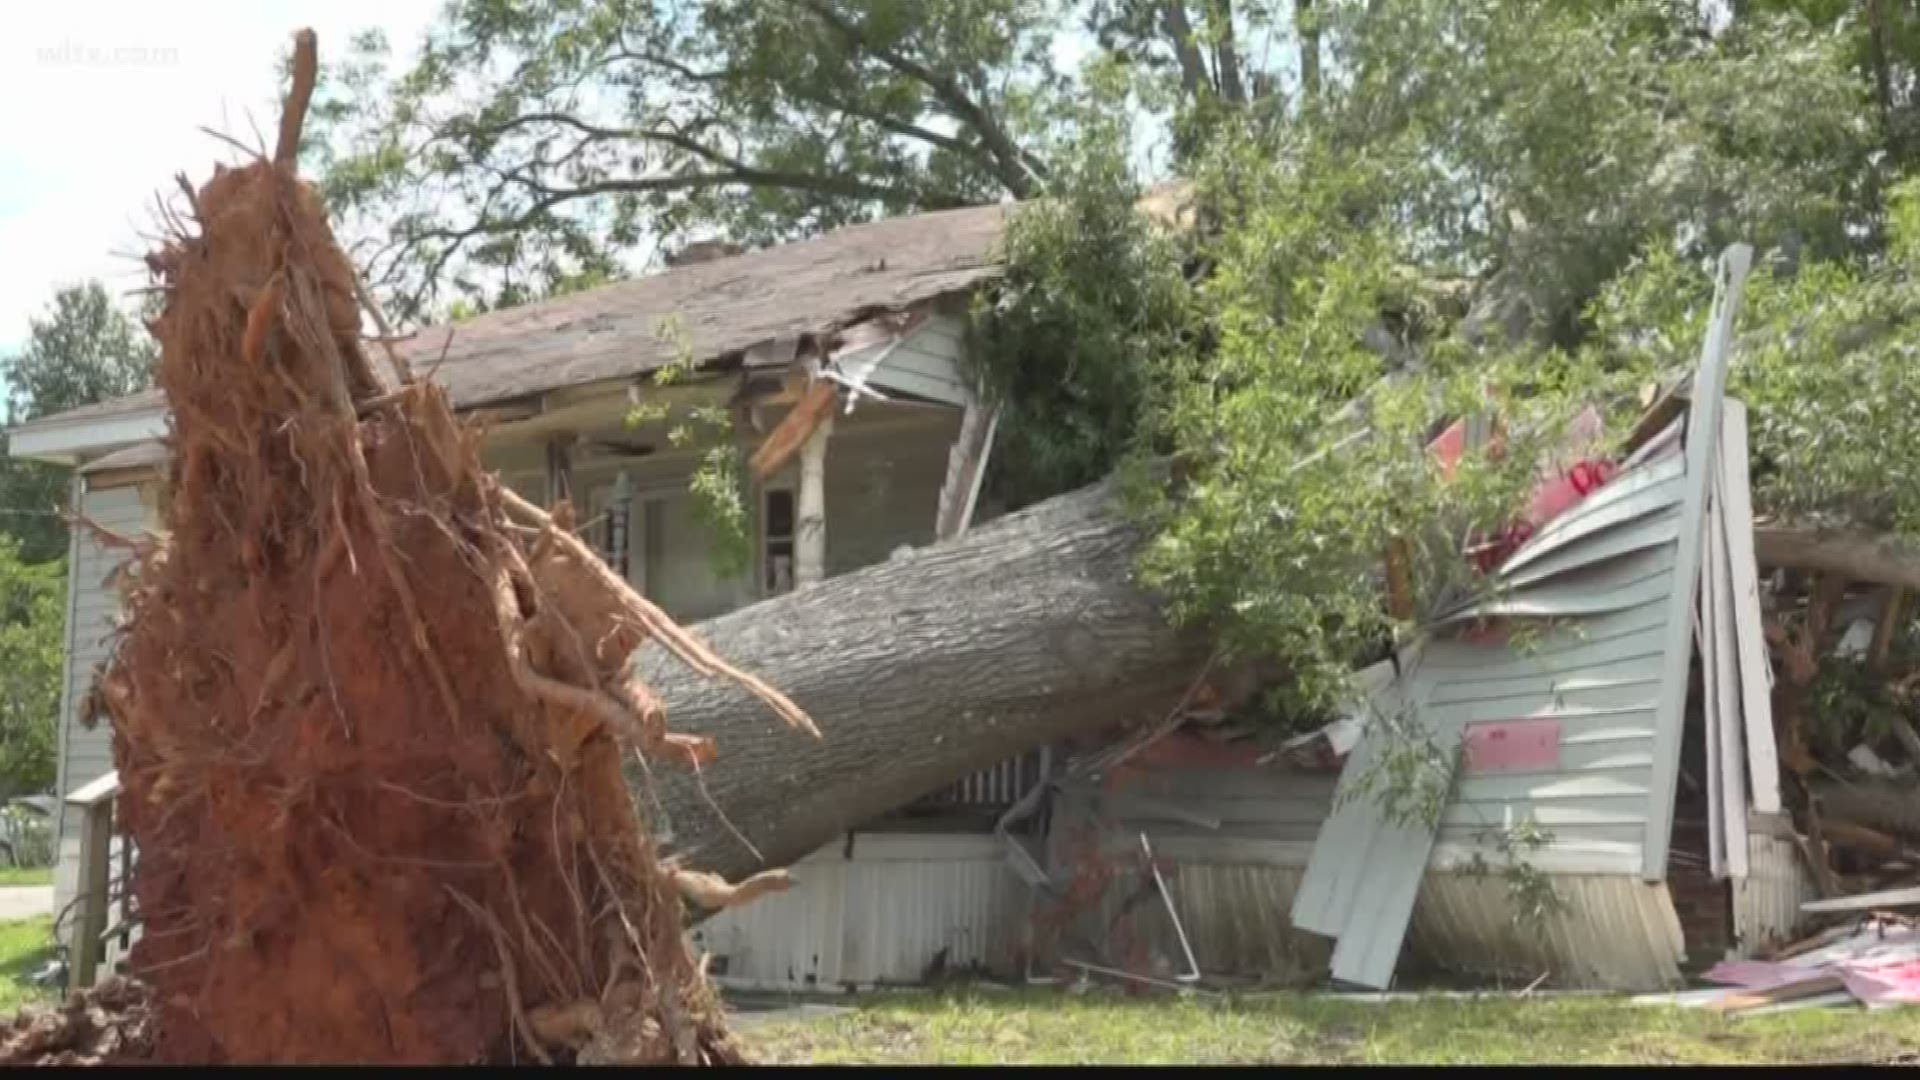 More than 3,000 lost power when storms swept through Newberry this weekend.   That number is now down to under 200 homes and the cleanup is still underway.